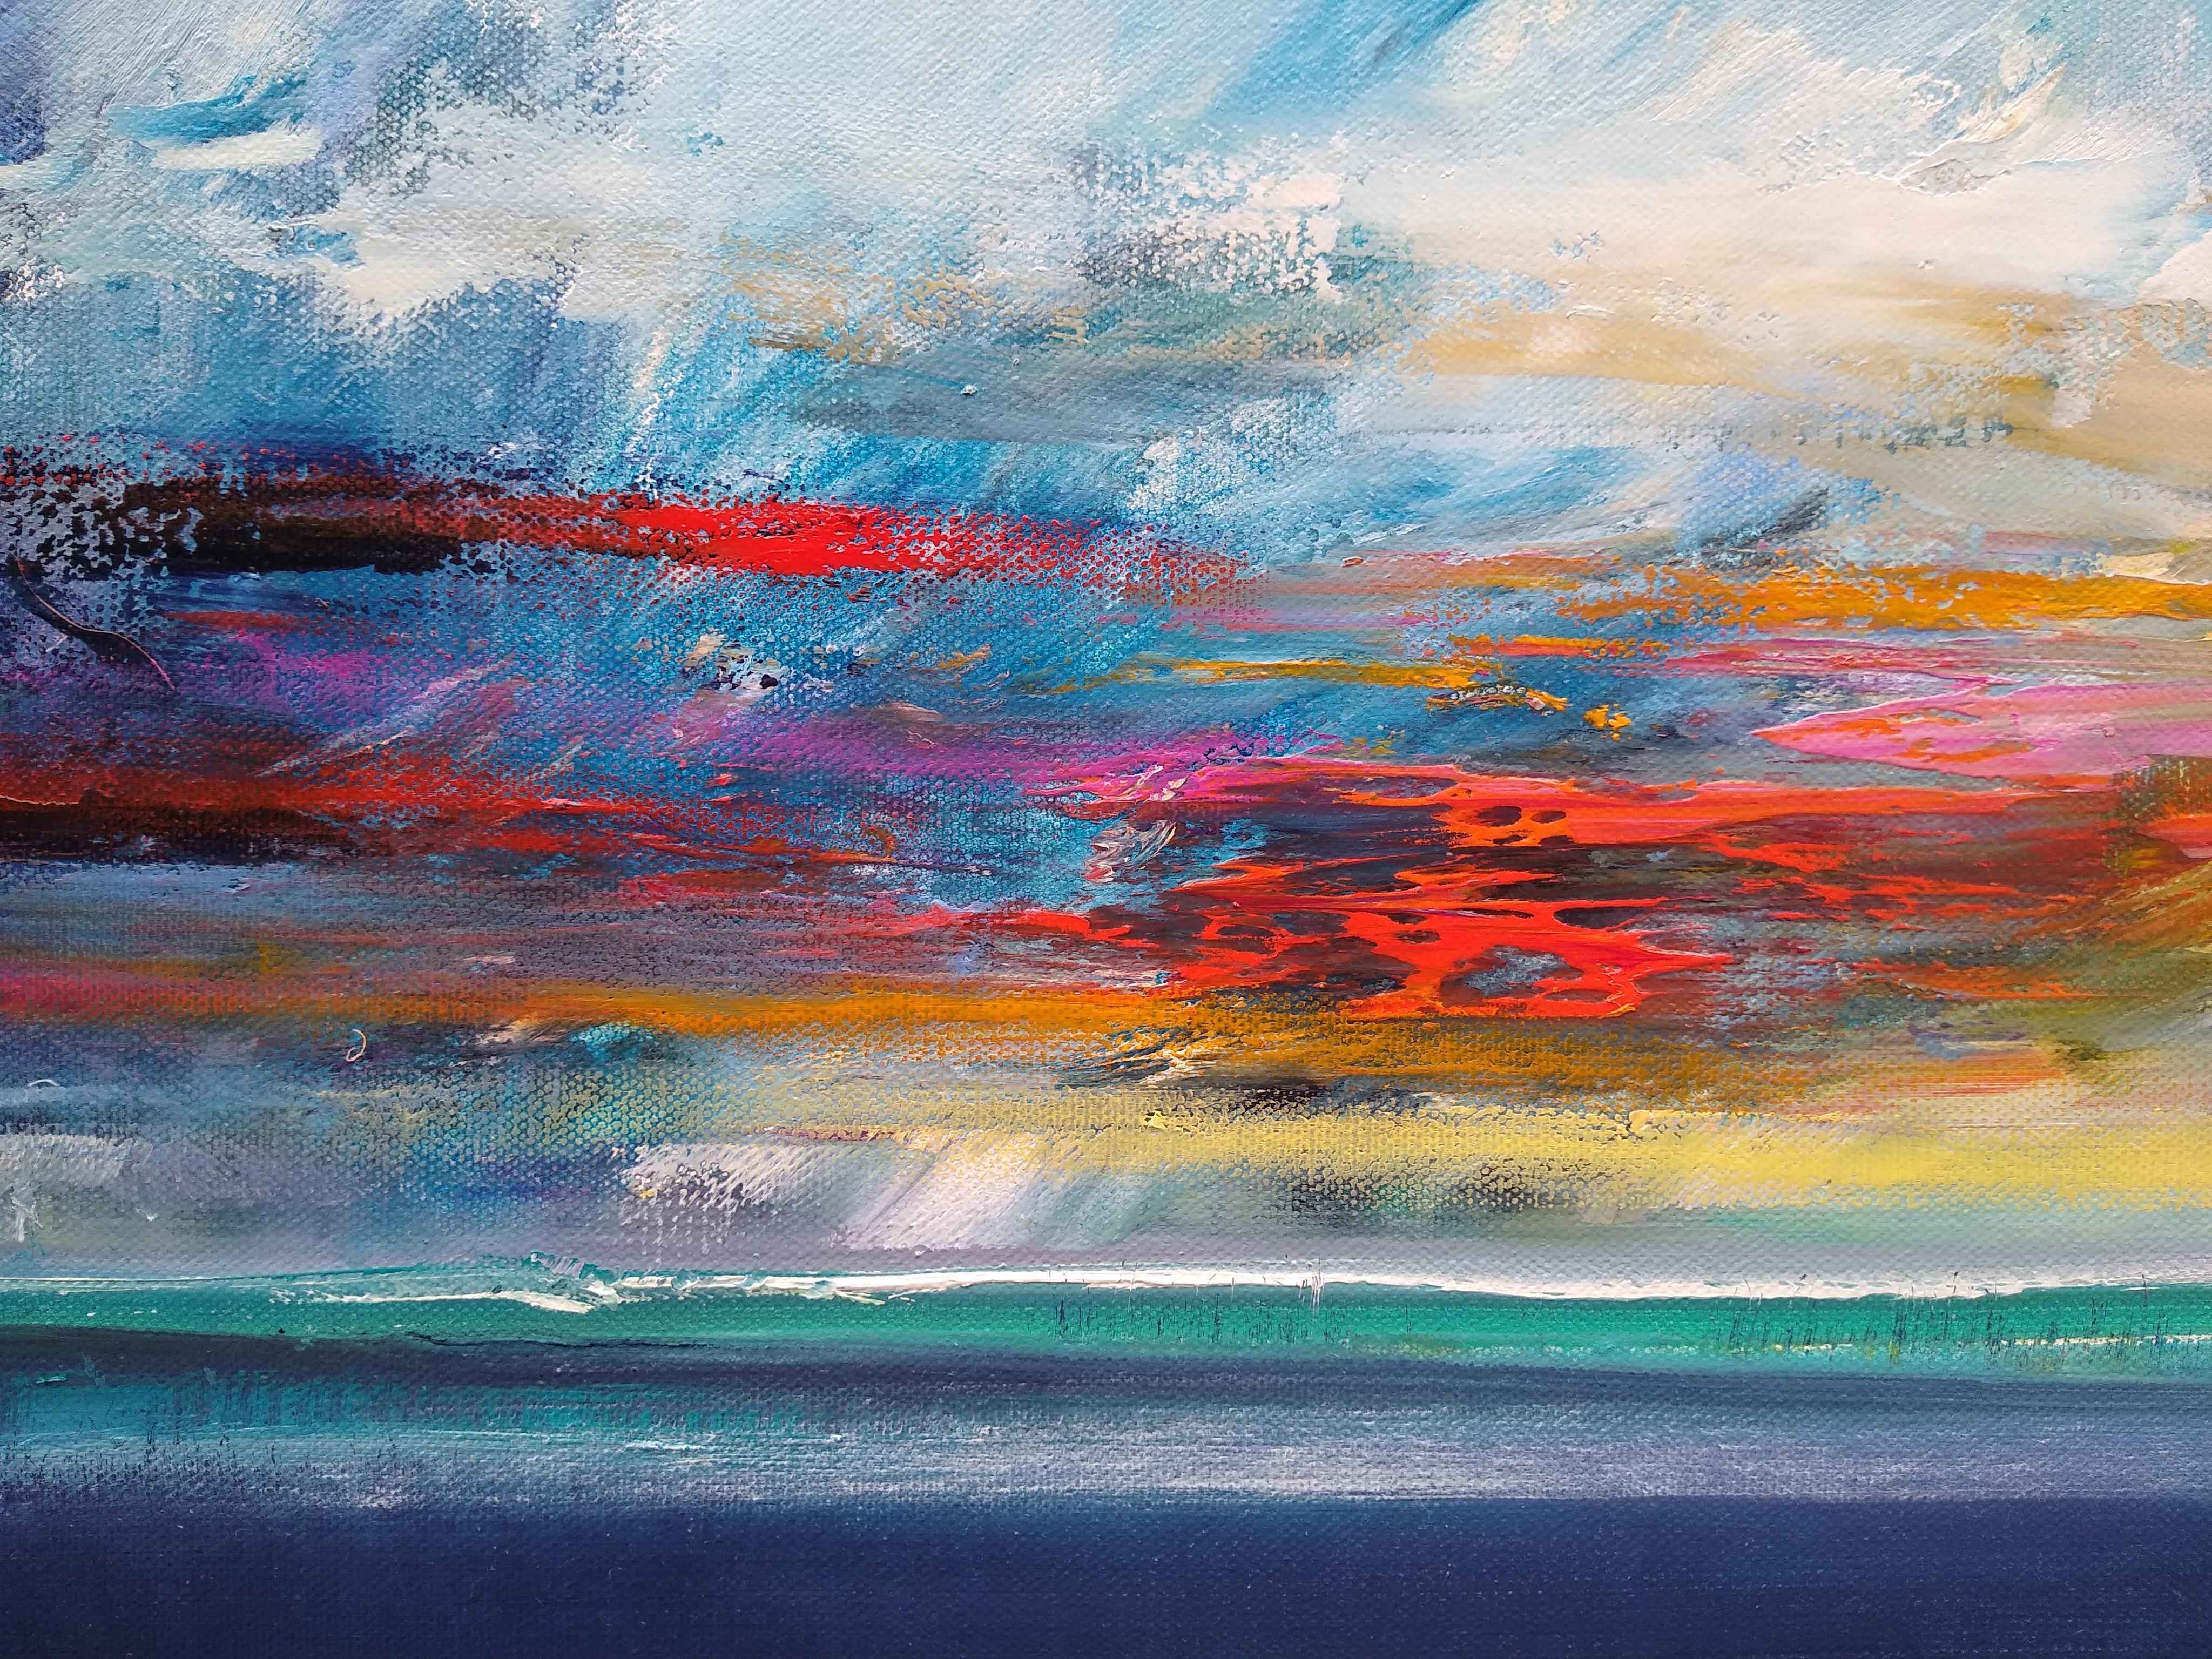 <p>Artist Comments<br />Autumn sunset over water. Rapid brushwork in the clouds in intersecting blue, purple, green, red, pink and yellow. At the edge of the turquoise horizon, the impression of falling rain. George Peebles is known for his dramatic